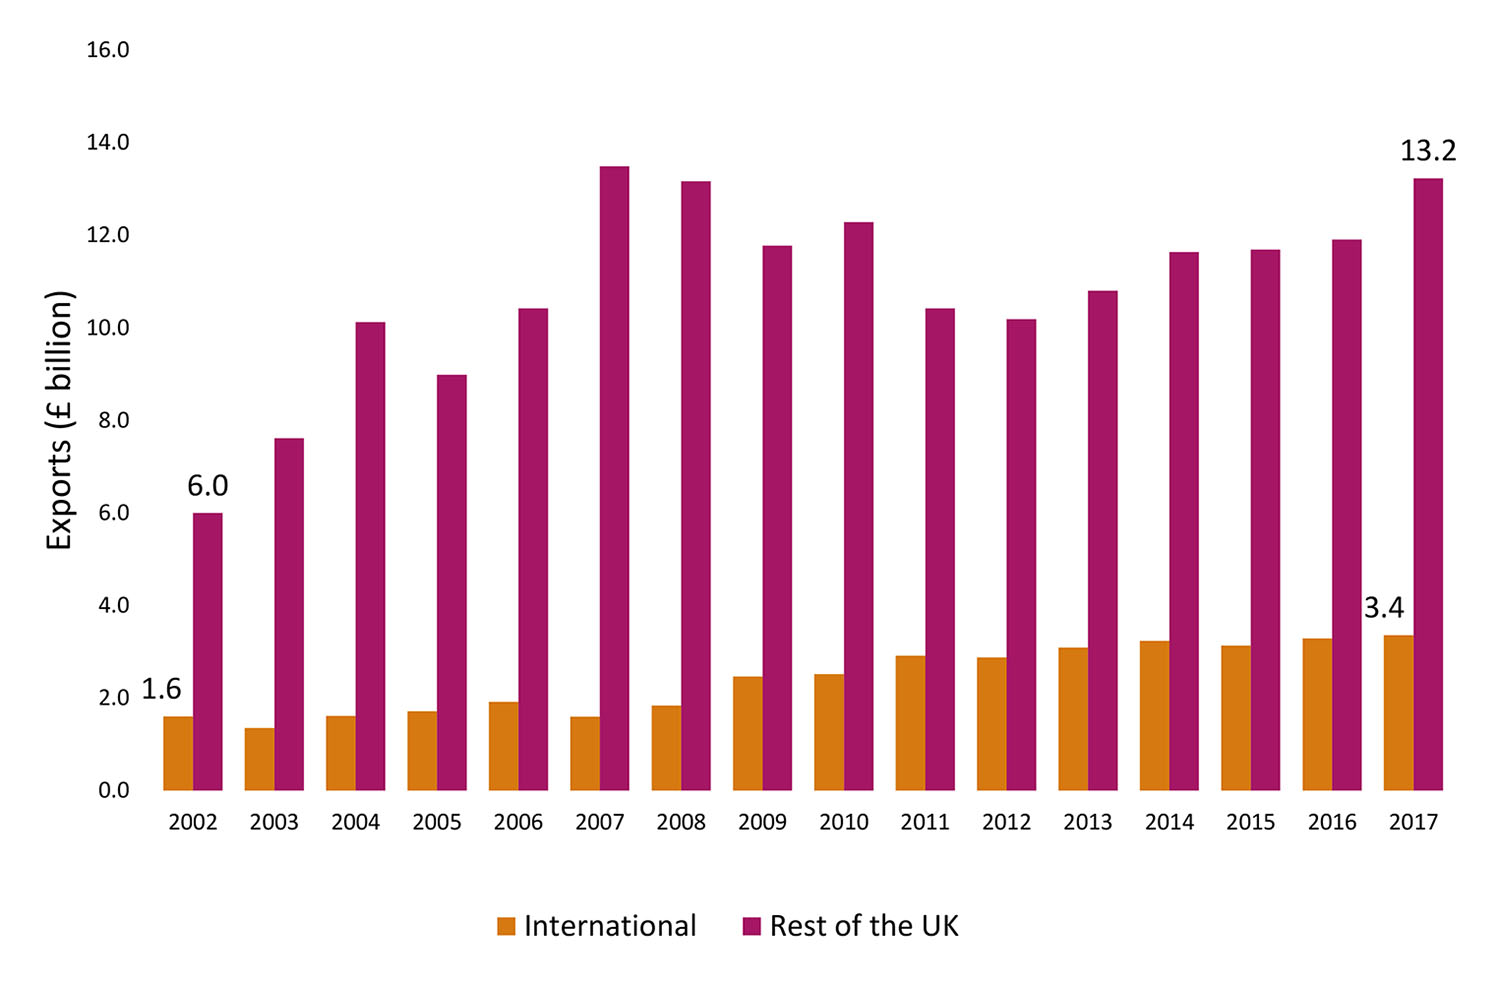 Scotland’s Financial and Business Services Exports, International and Rest of UK, 2002-2017 Chart